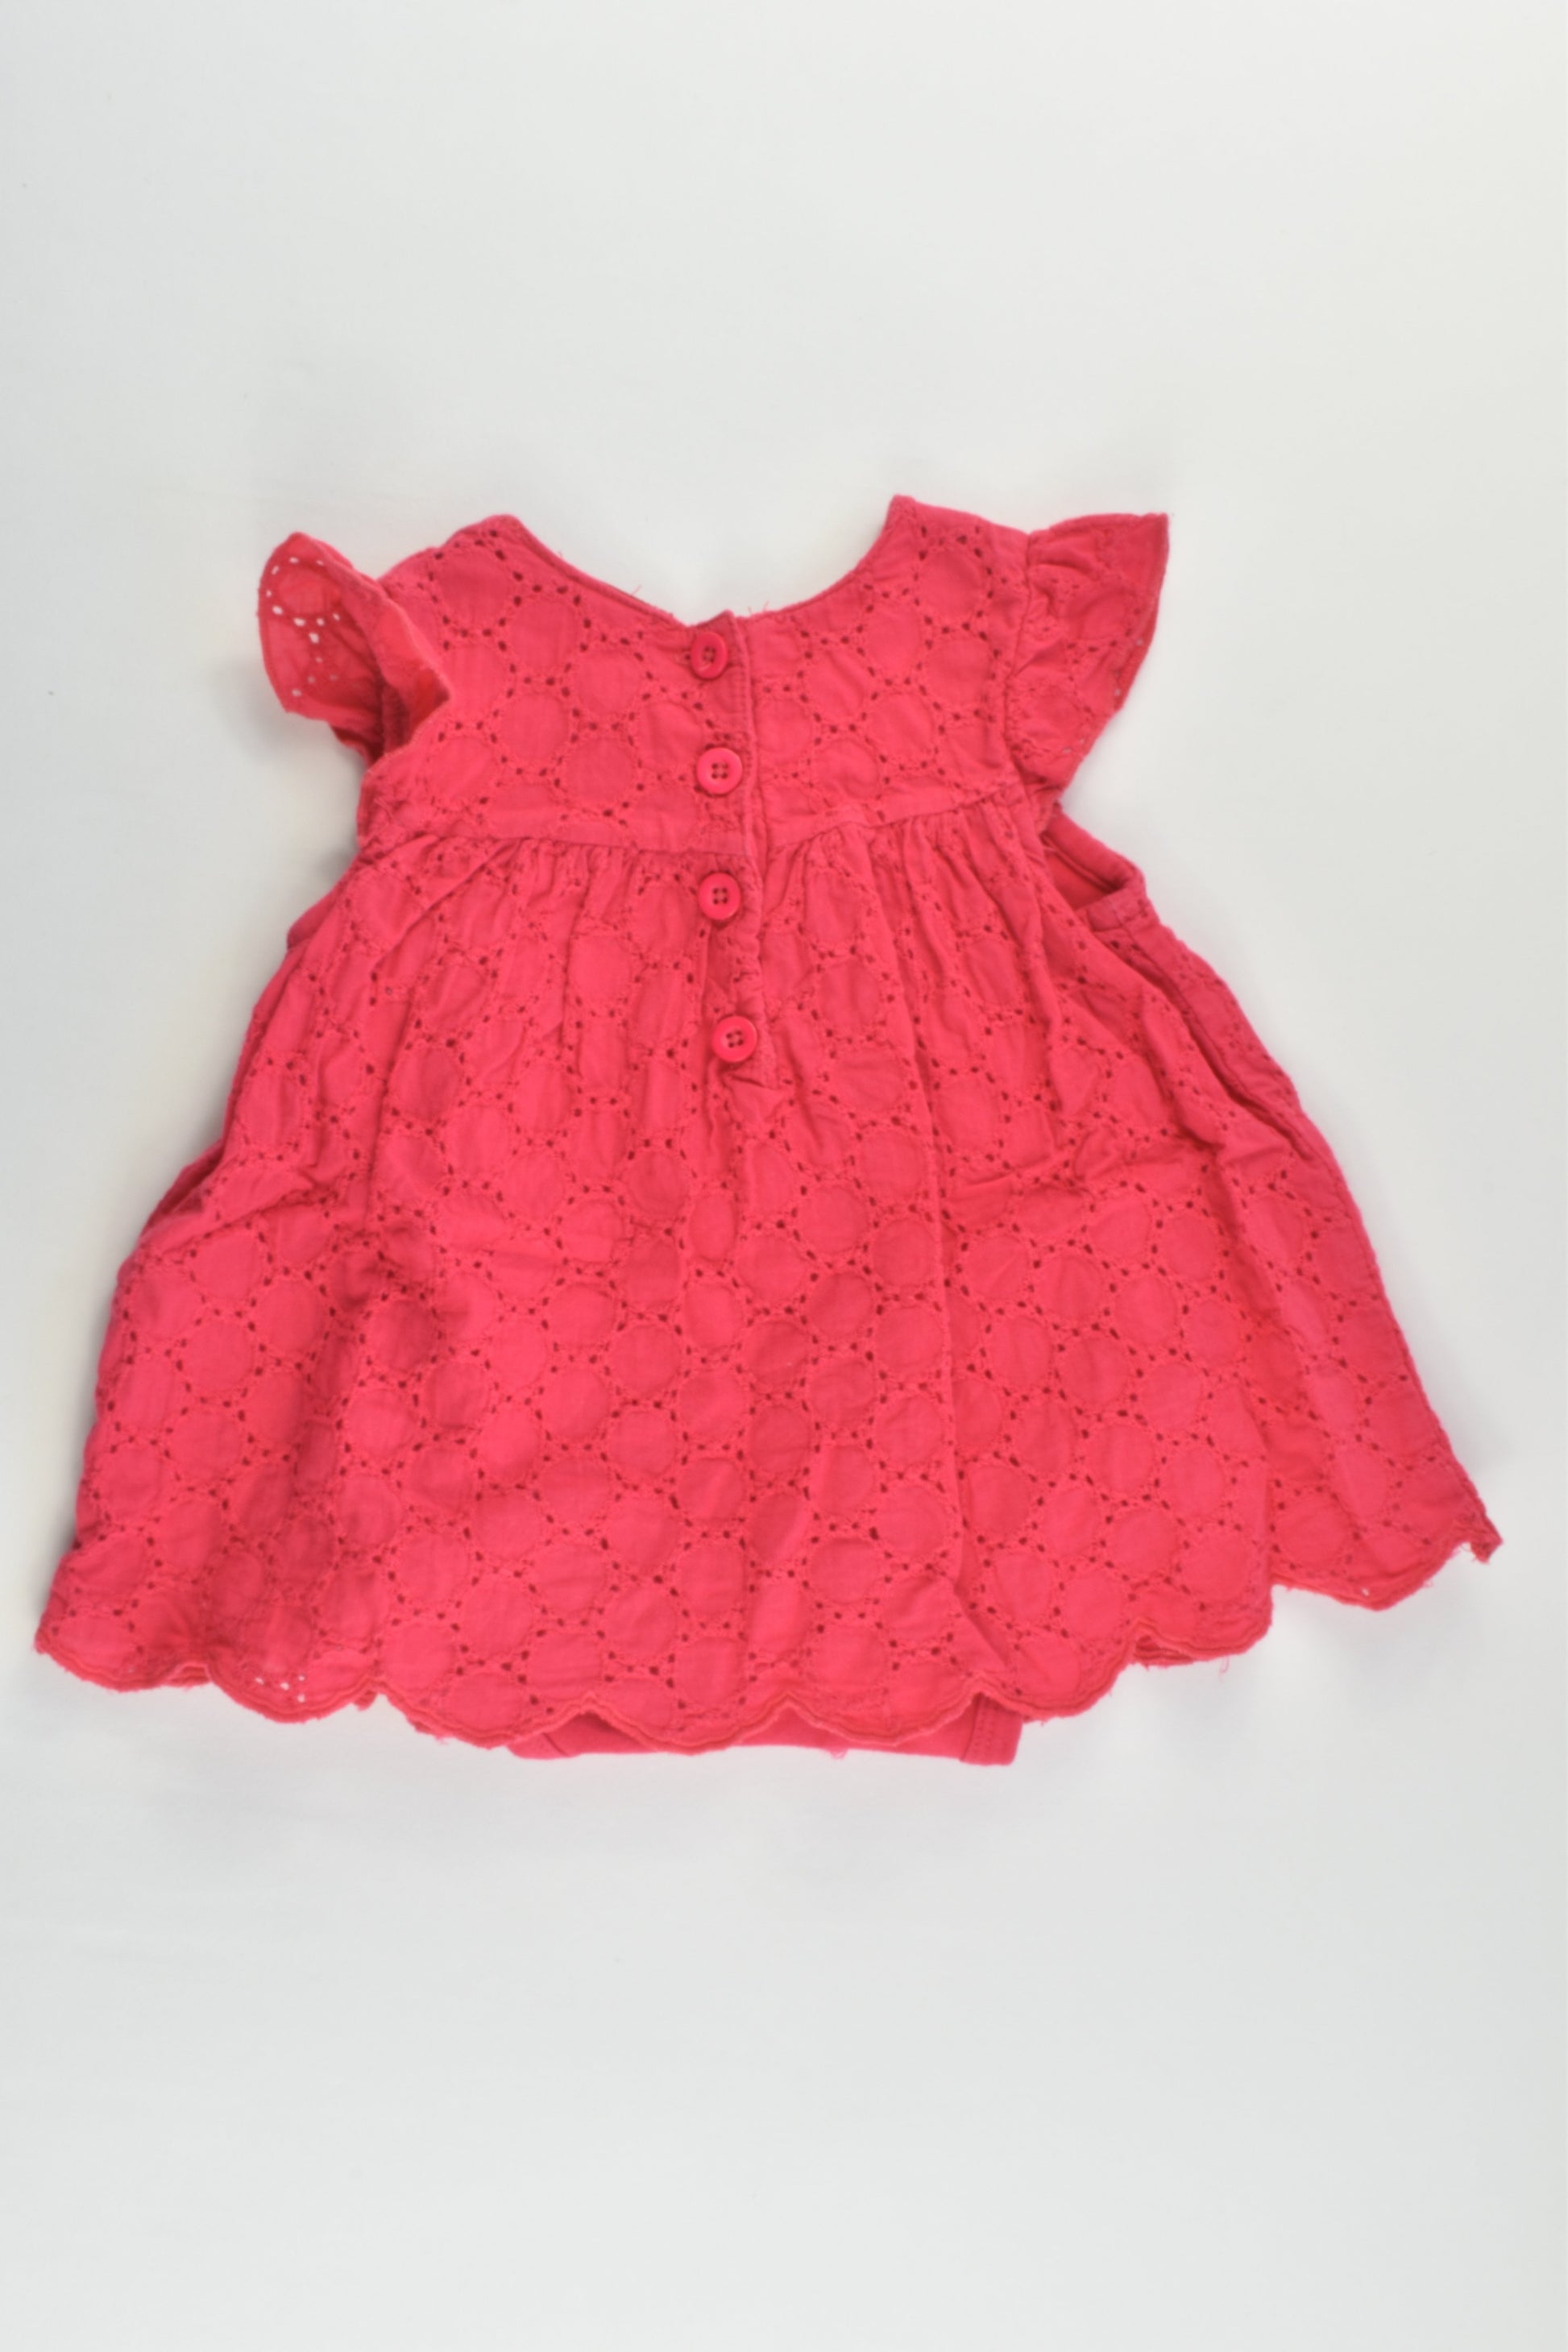 Sprout Size 00 Lace Dress with Bodysuit Underneath